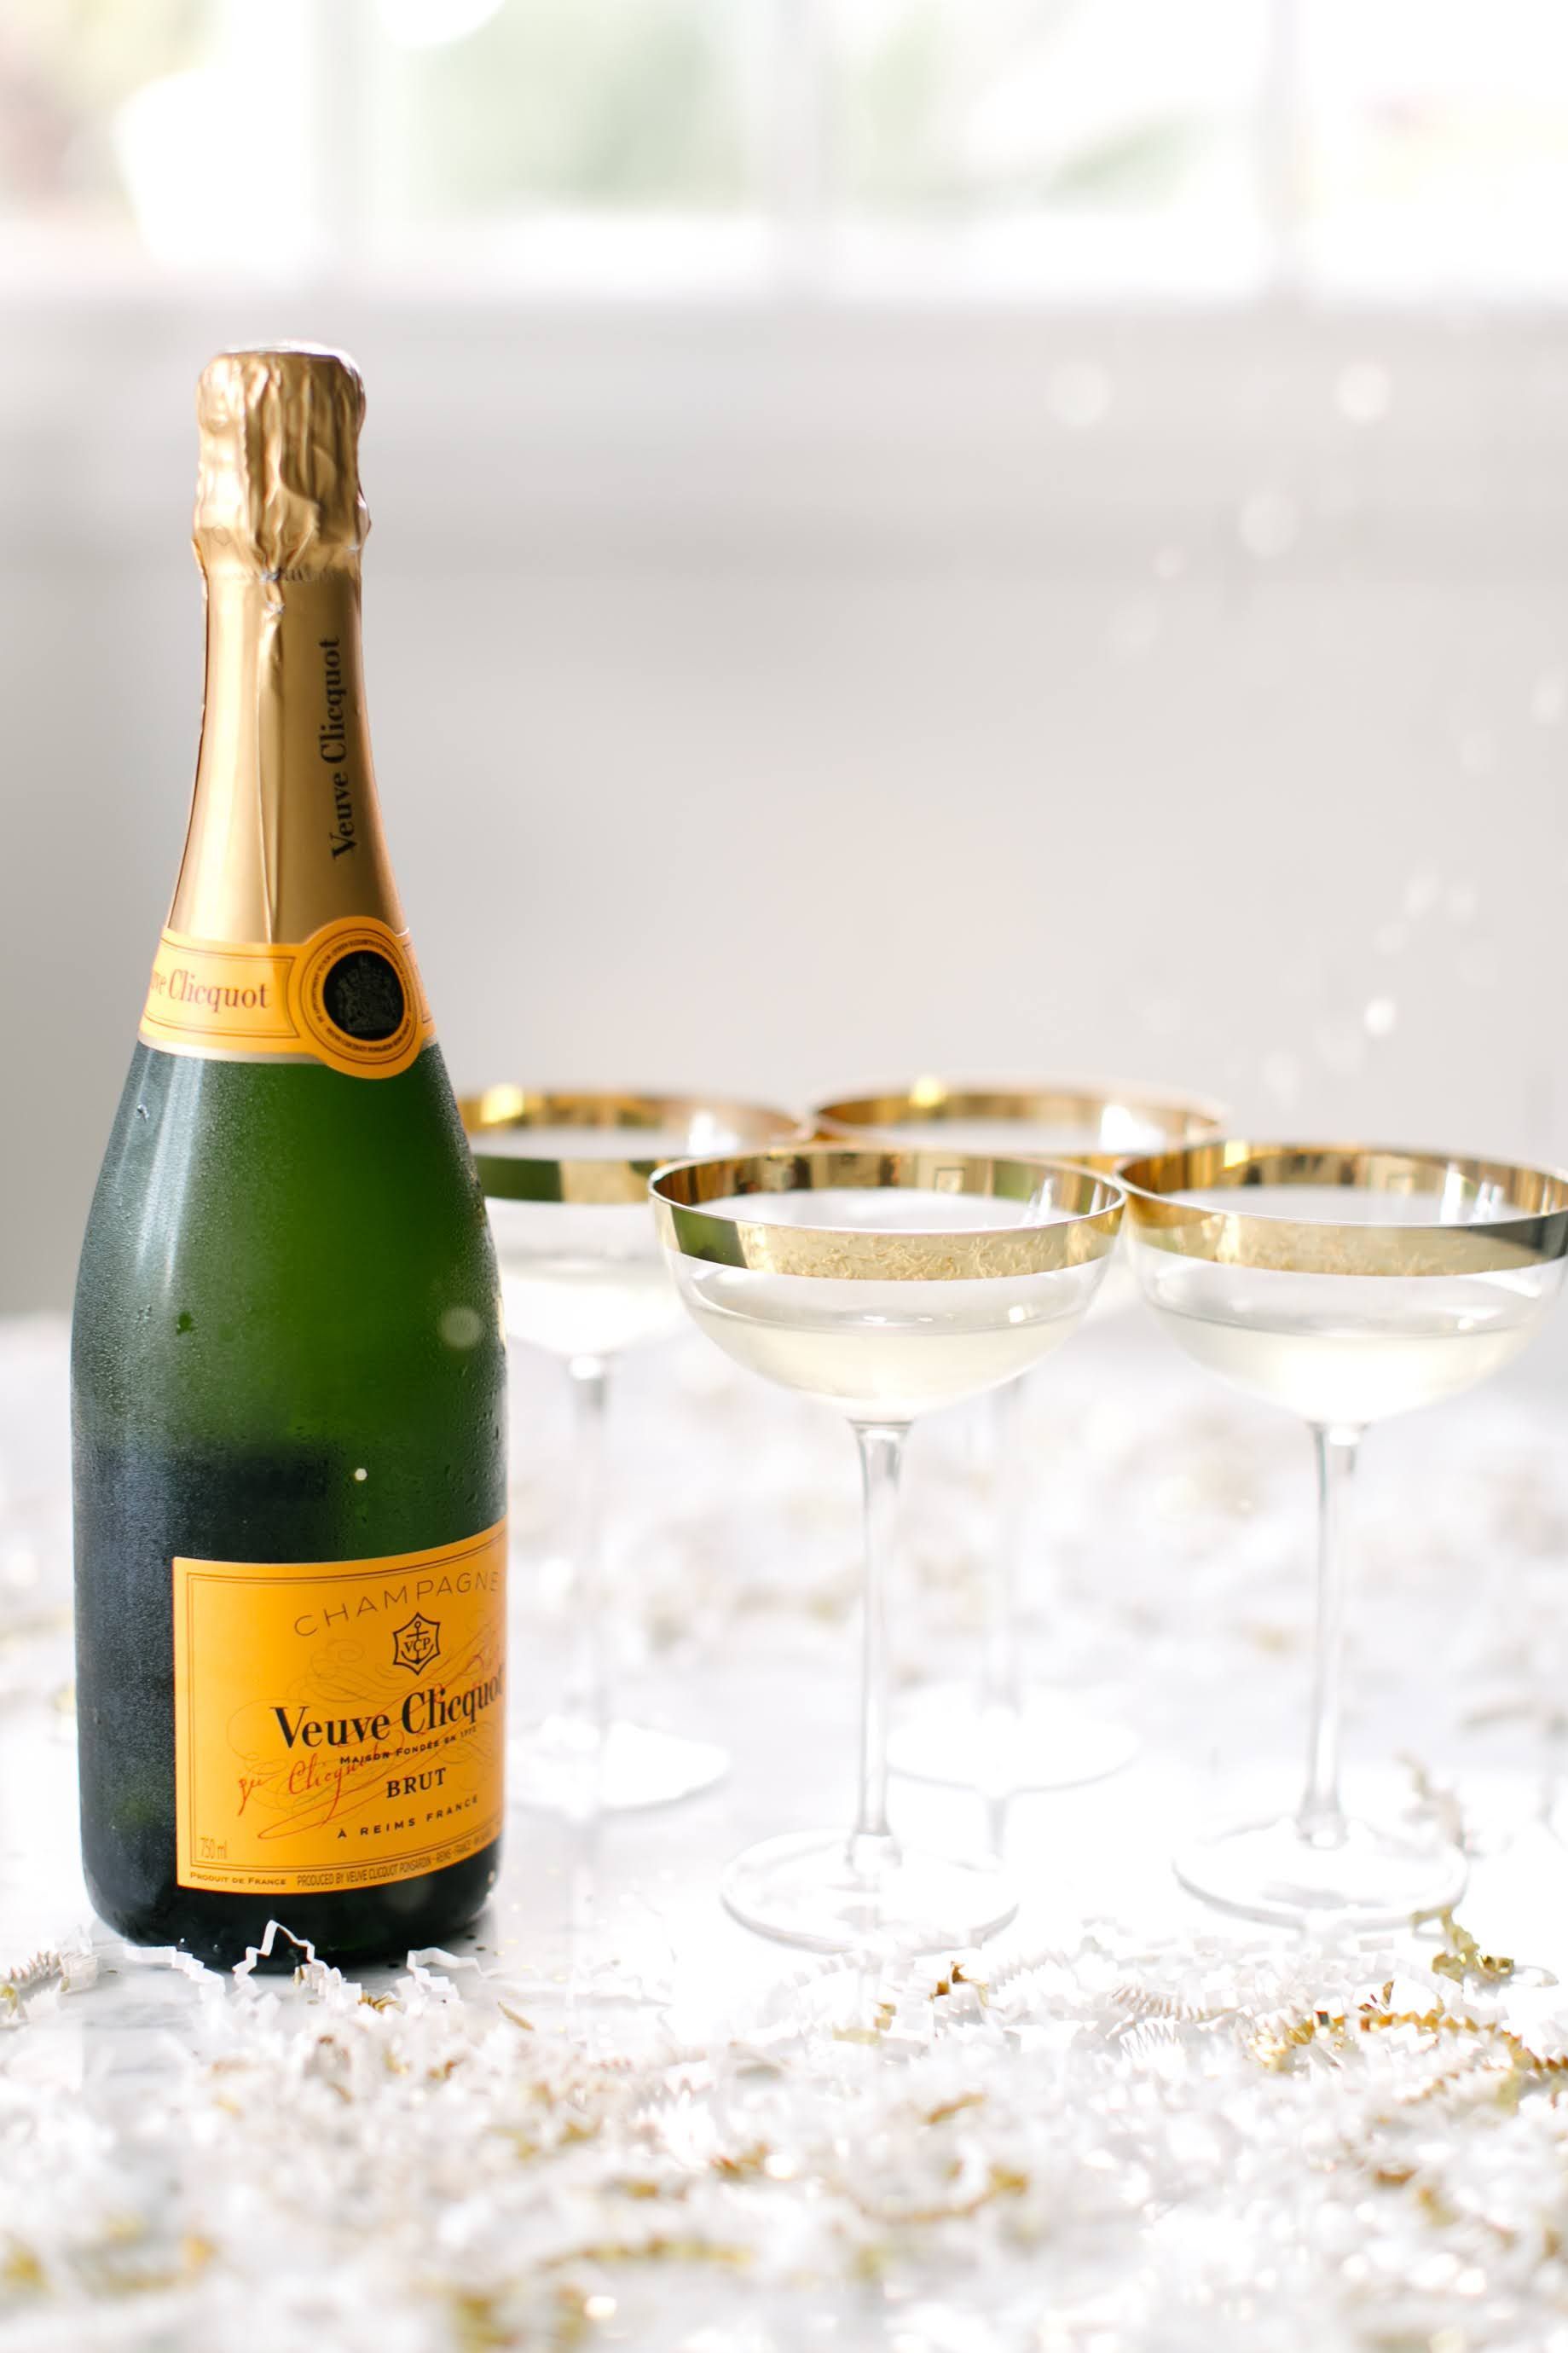 Photo of Veuve Clicquot champagne bottle and champagne glasses